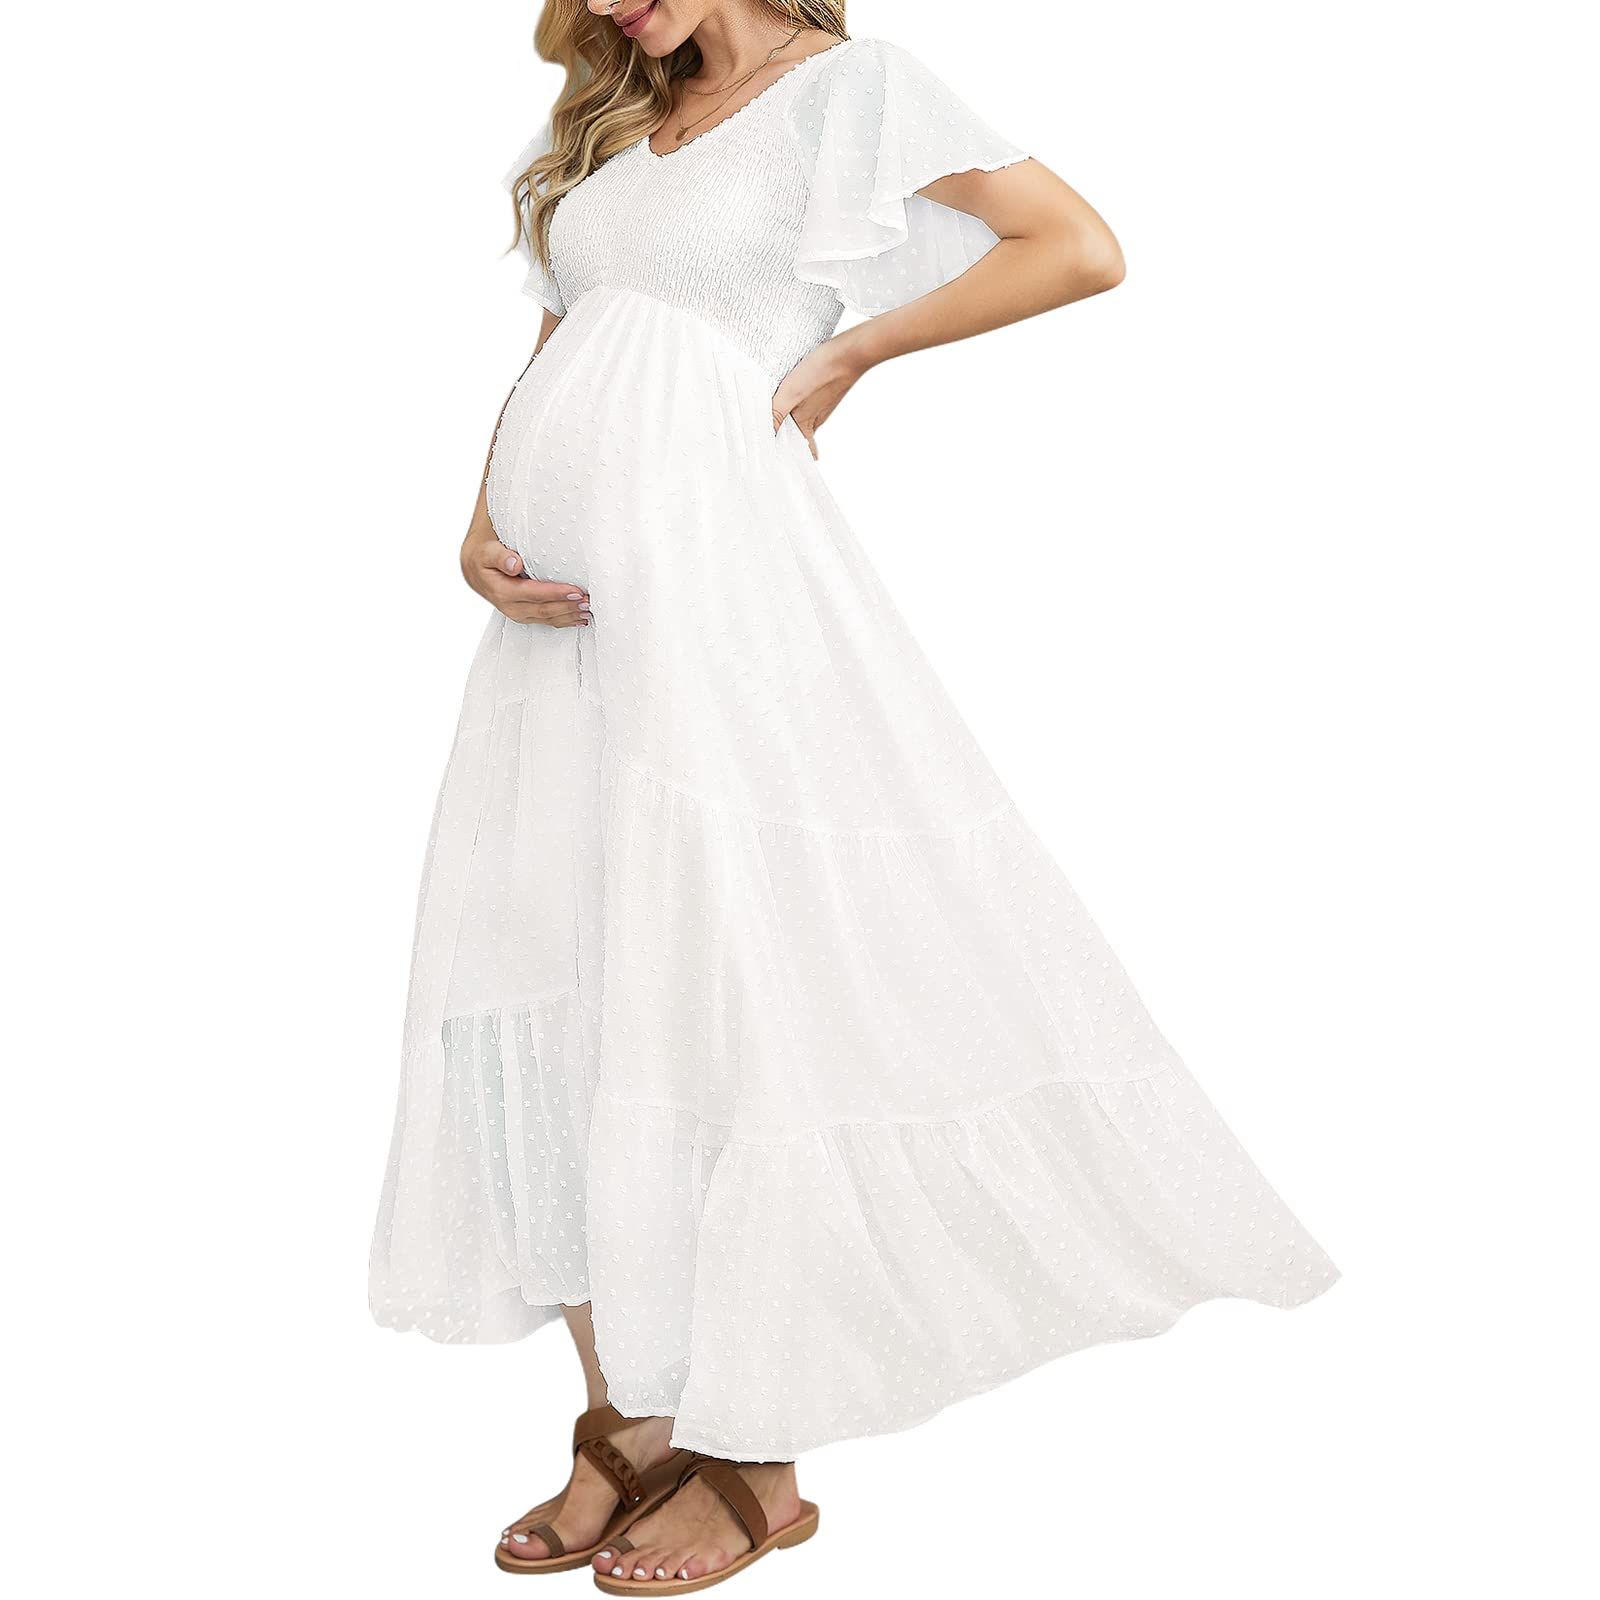 Baby shower dress | Baby shower outfit, Baby shower dresses, Shower outfits